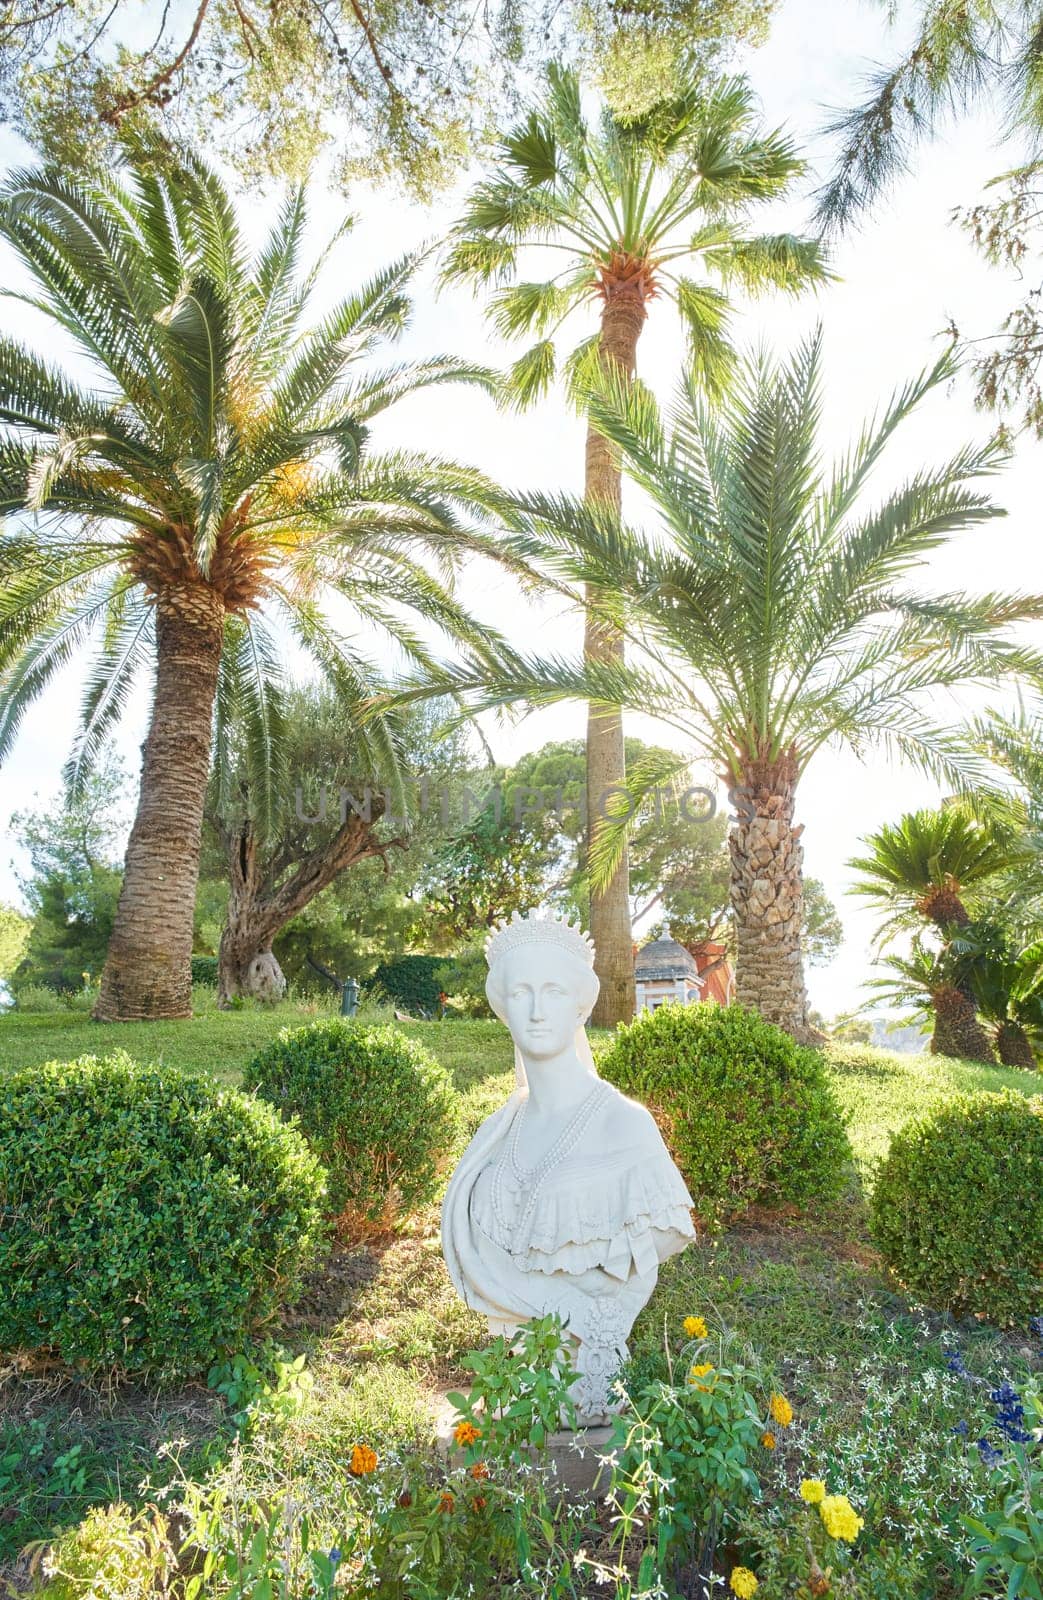 Monaco, Monaco Ville, 28 September 2022 - Bust by Georges Diebolt of the Empress Eugenie, wife of Napoleon III in gardens of Monaco Ville, looking at the horizon towards Cap Martin. High quality photo